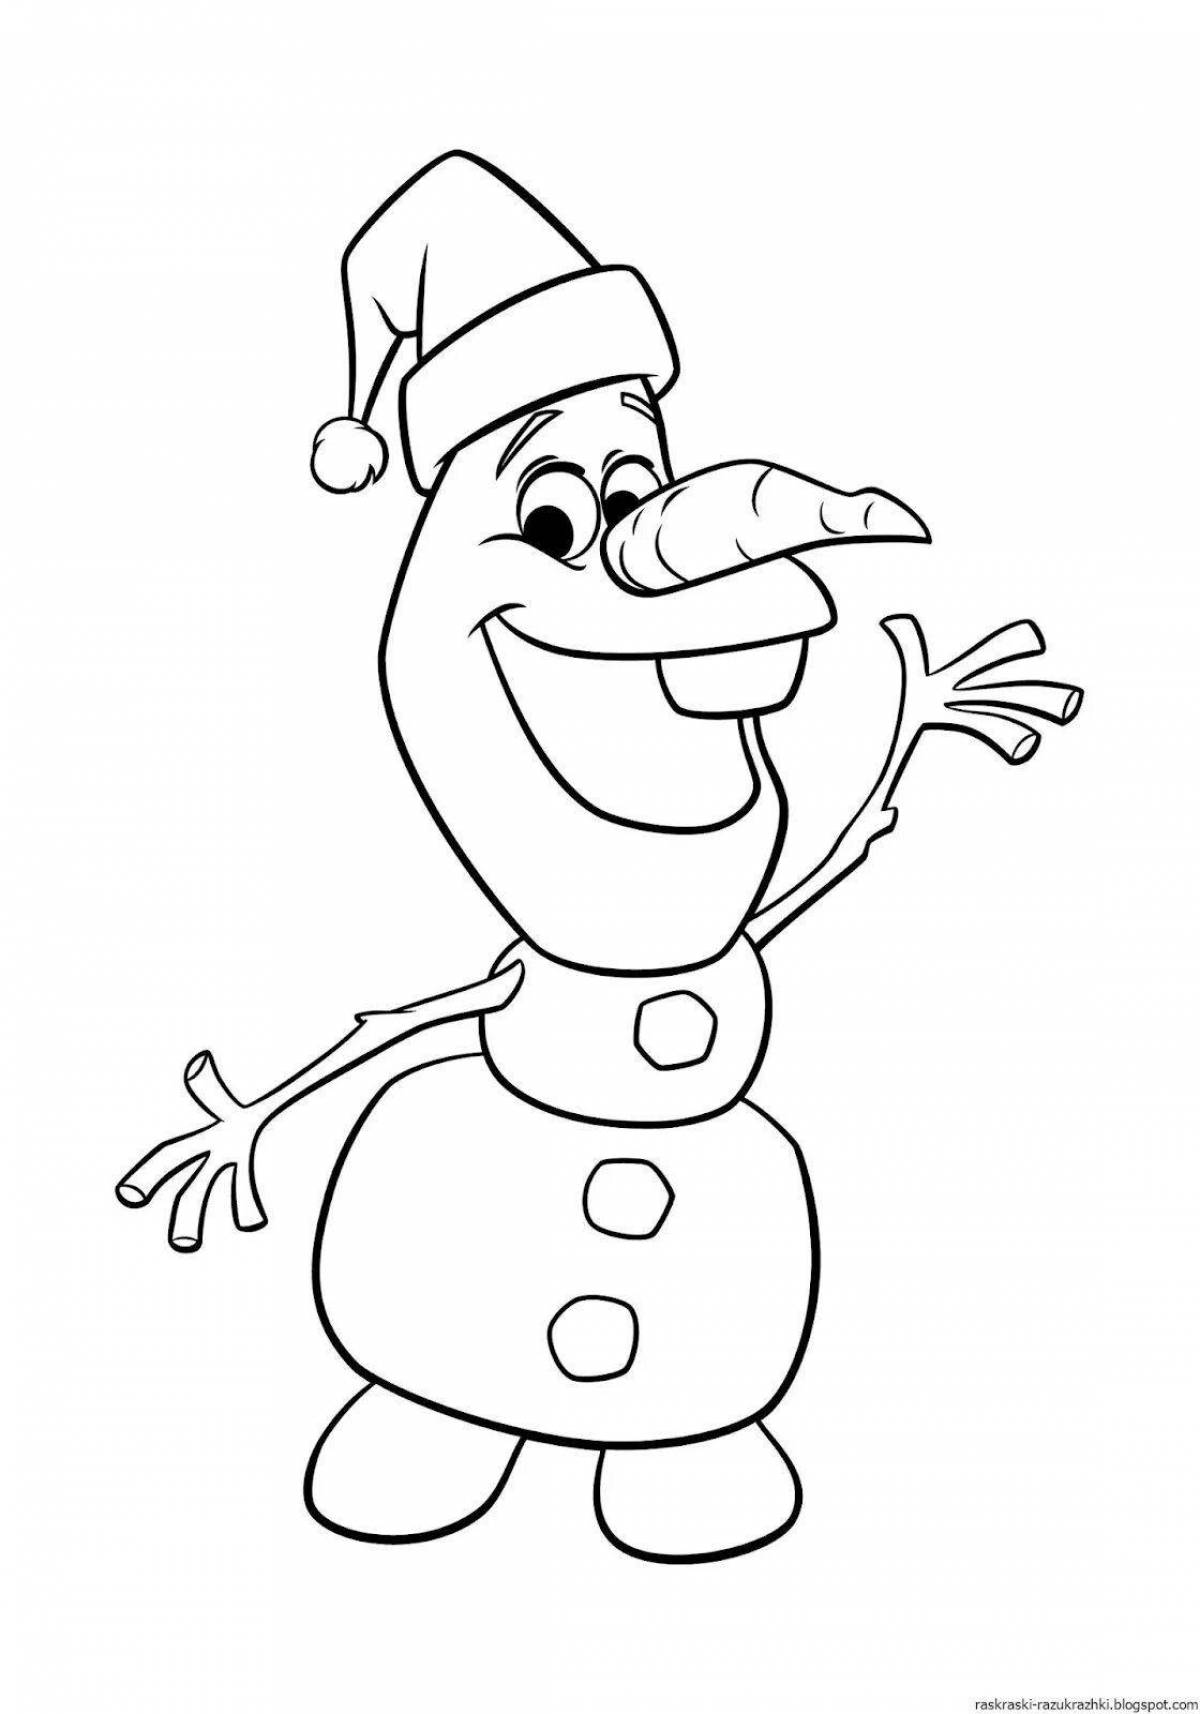 Olaf the snowman coloring page